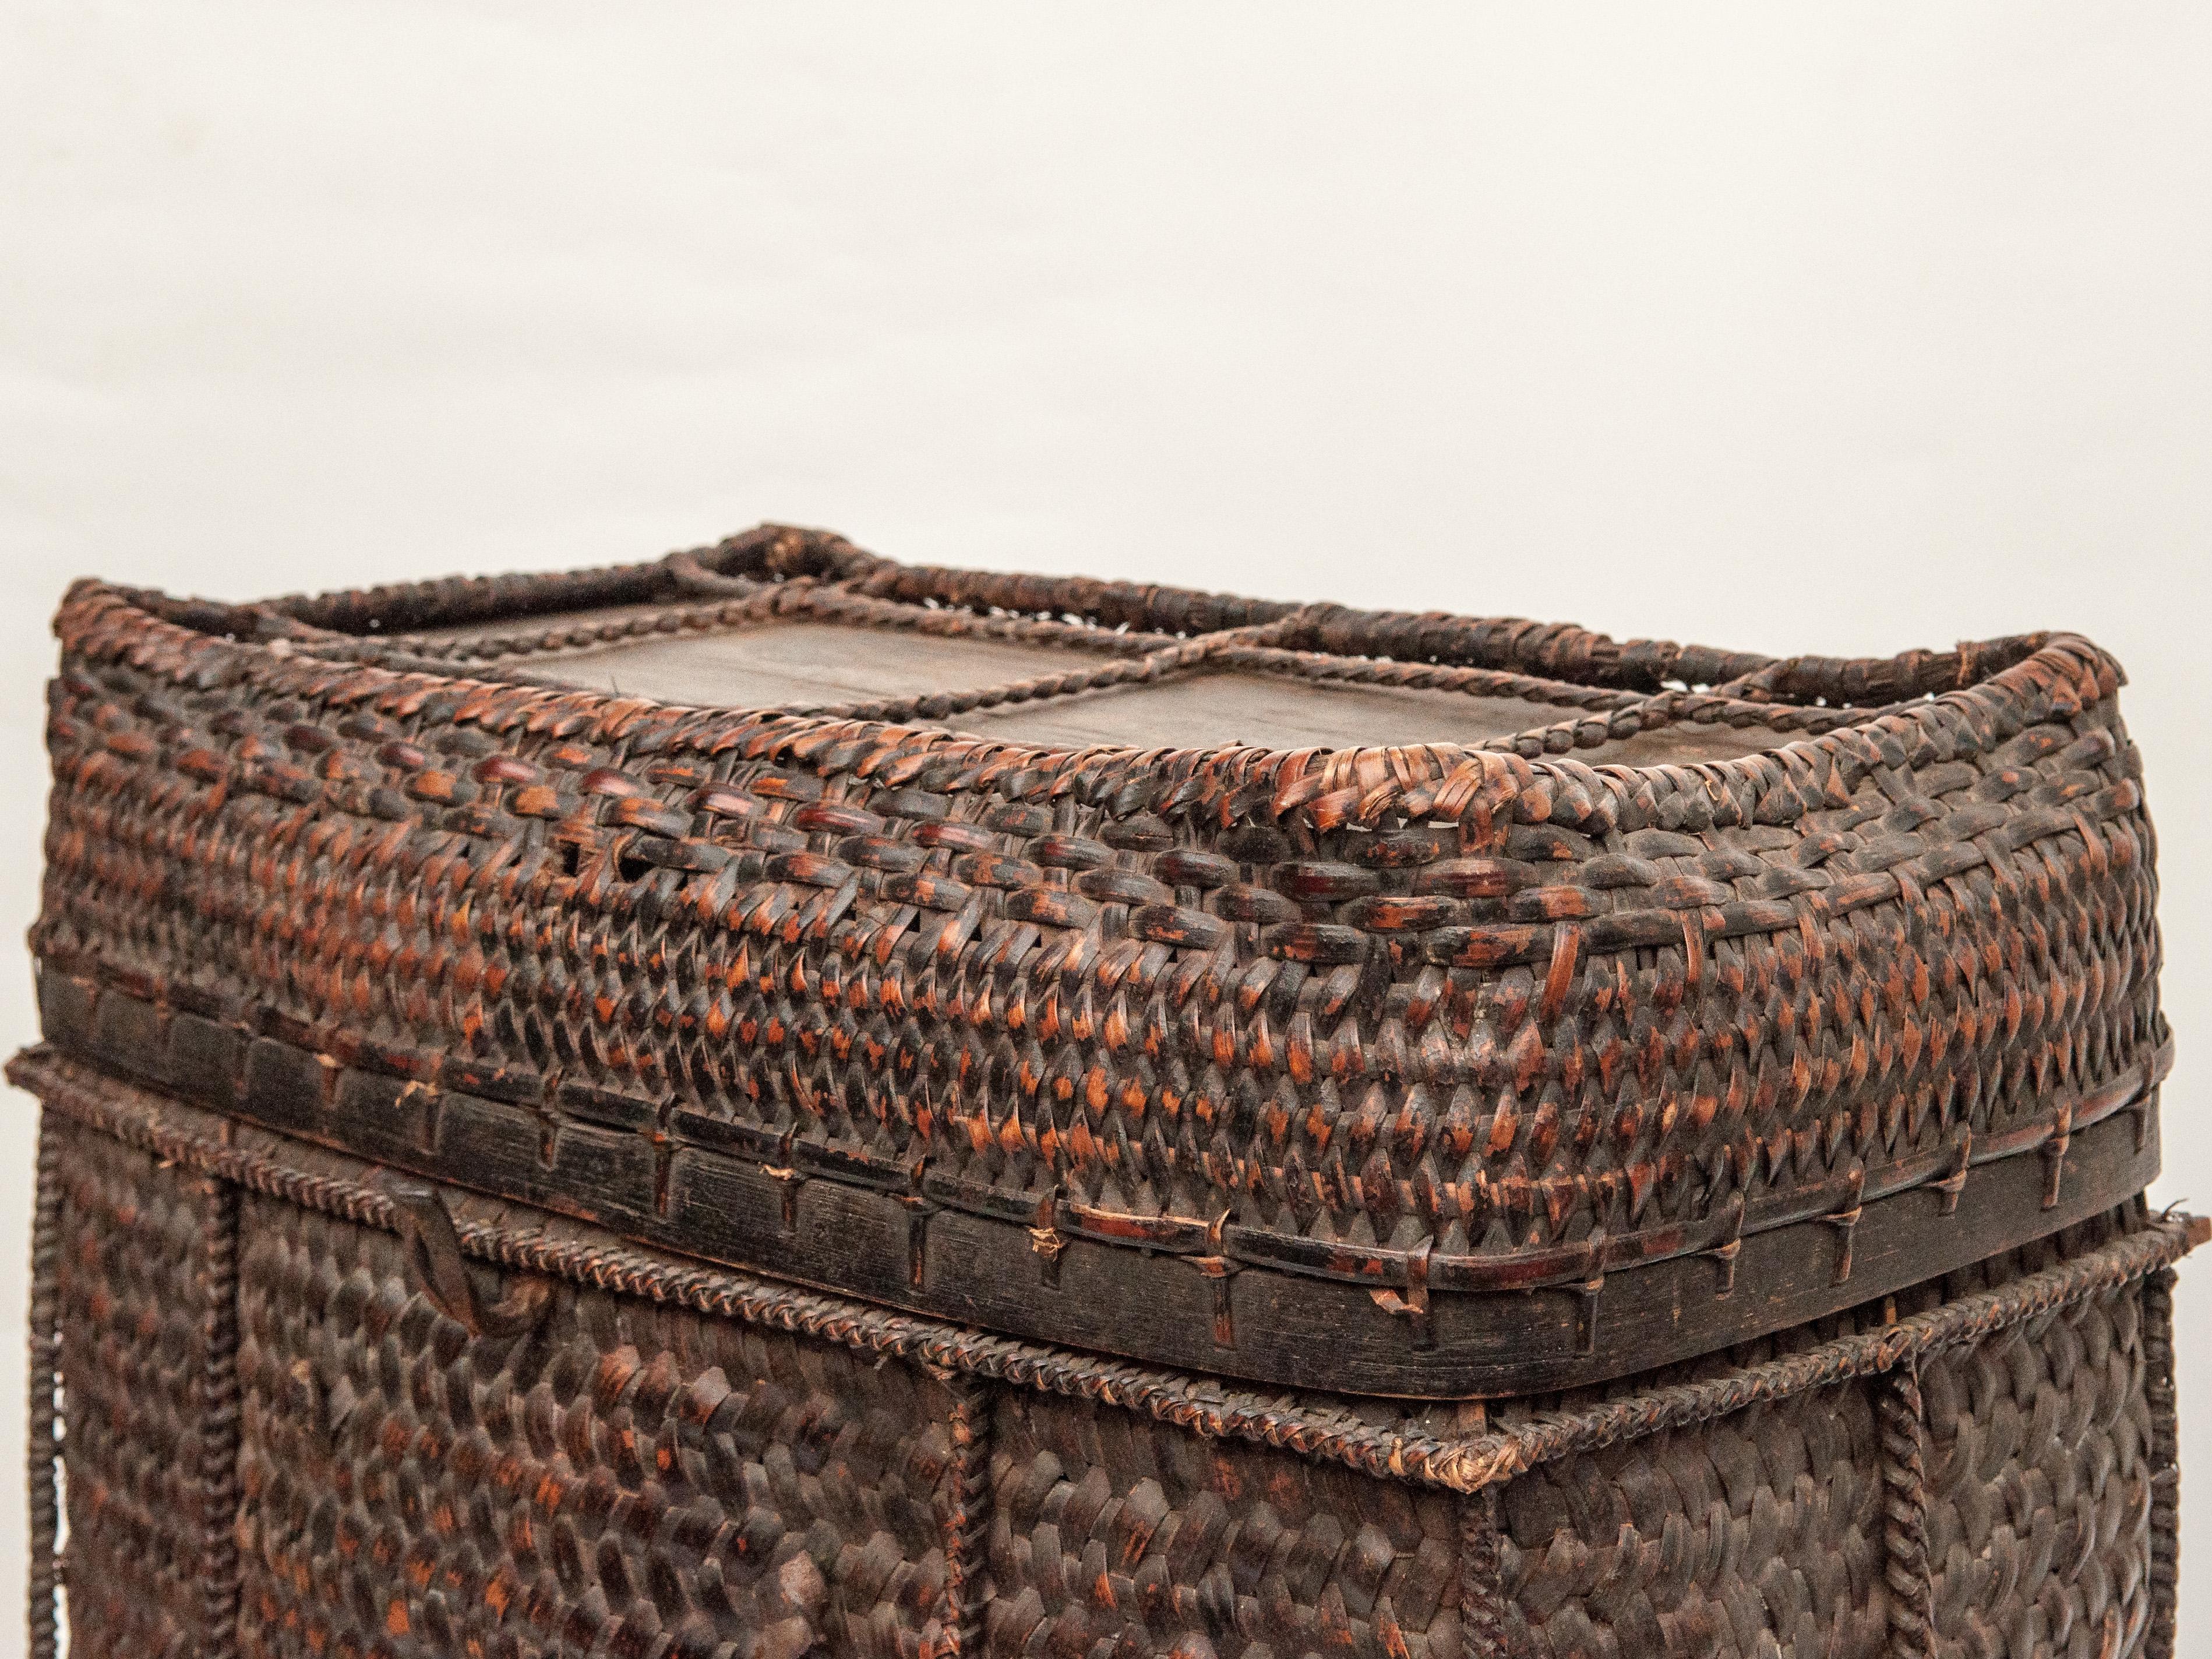 Bhutanese Large Vintage Tribal Storage Basket with Lid from Bhutan, Mid-Late 20th Century